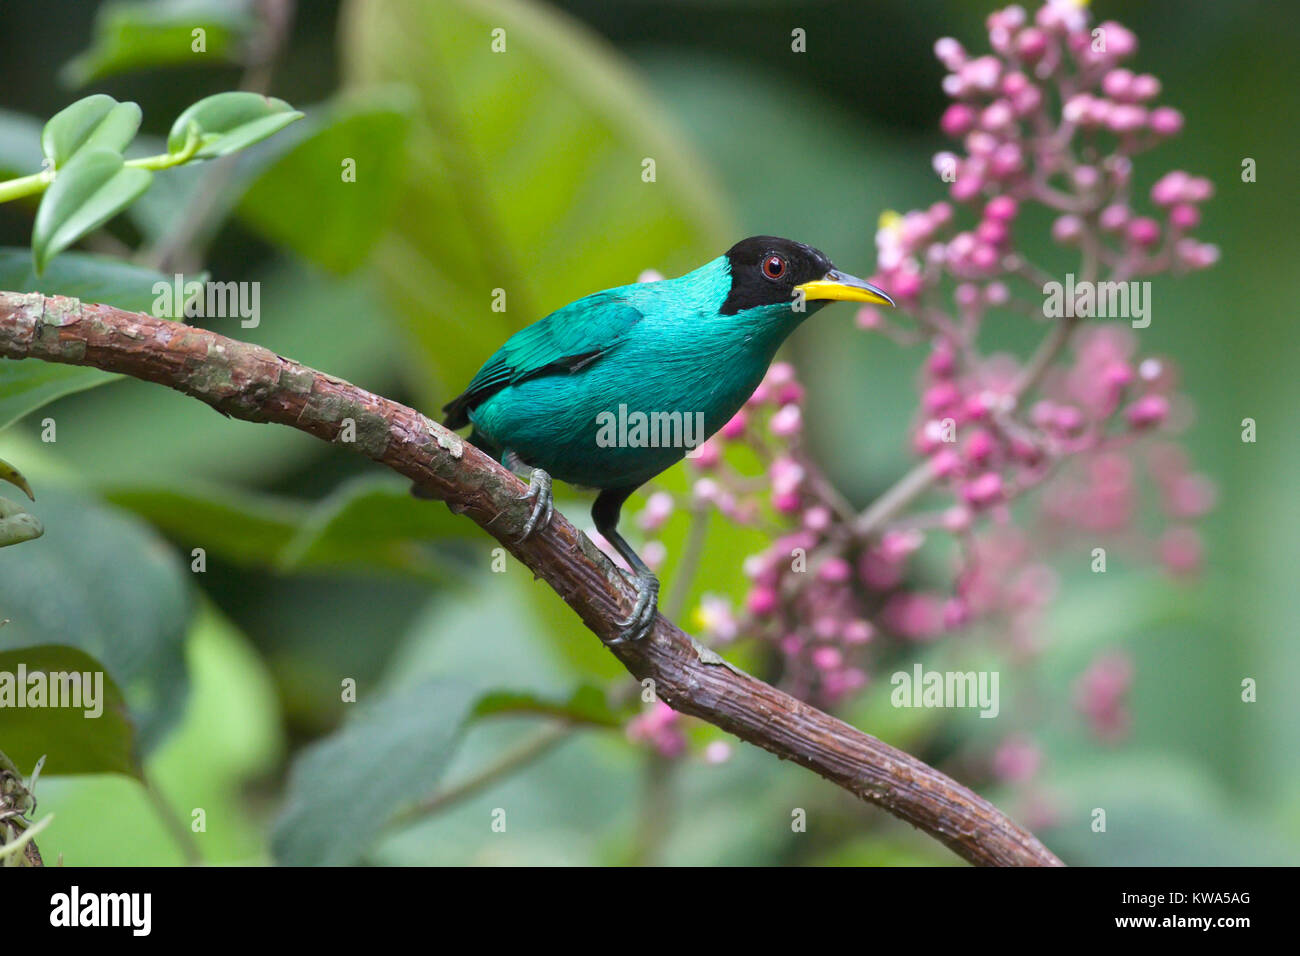 Green Honeycreeper perched on a branch with pink flowers Stock Photo